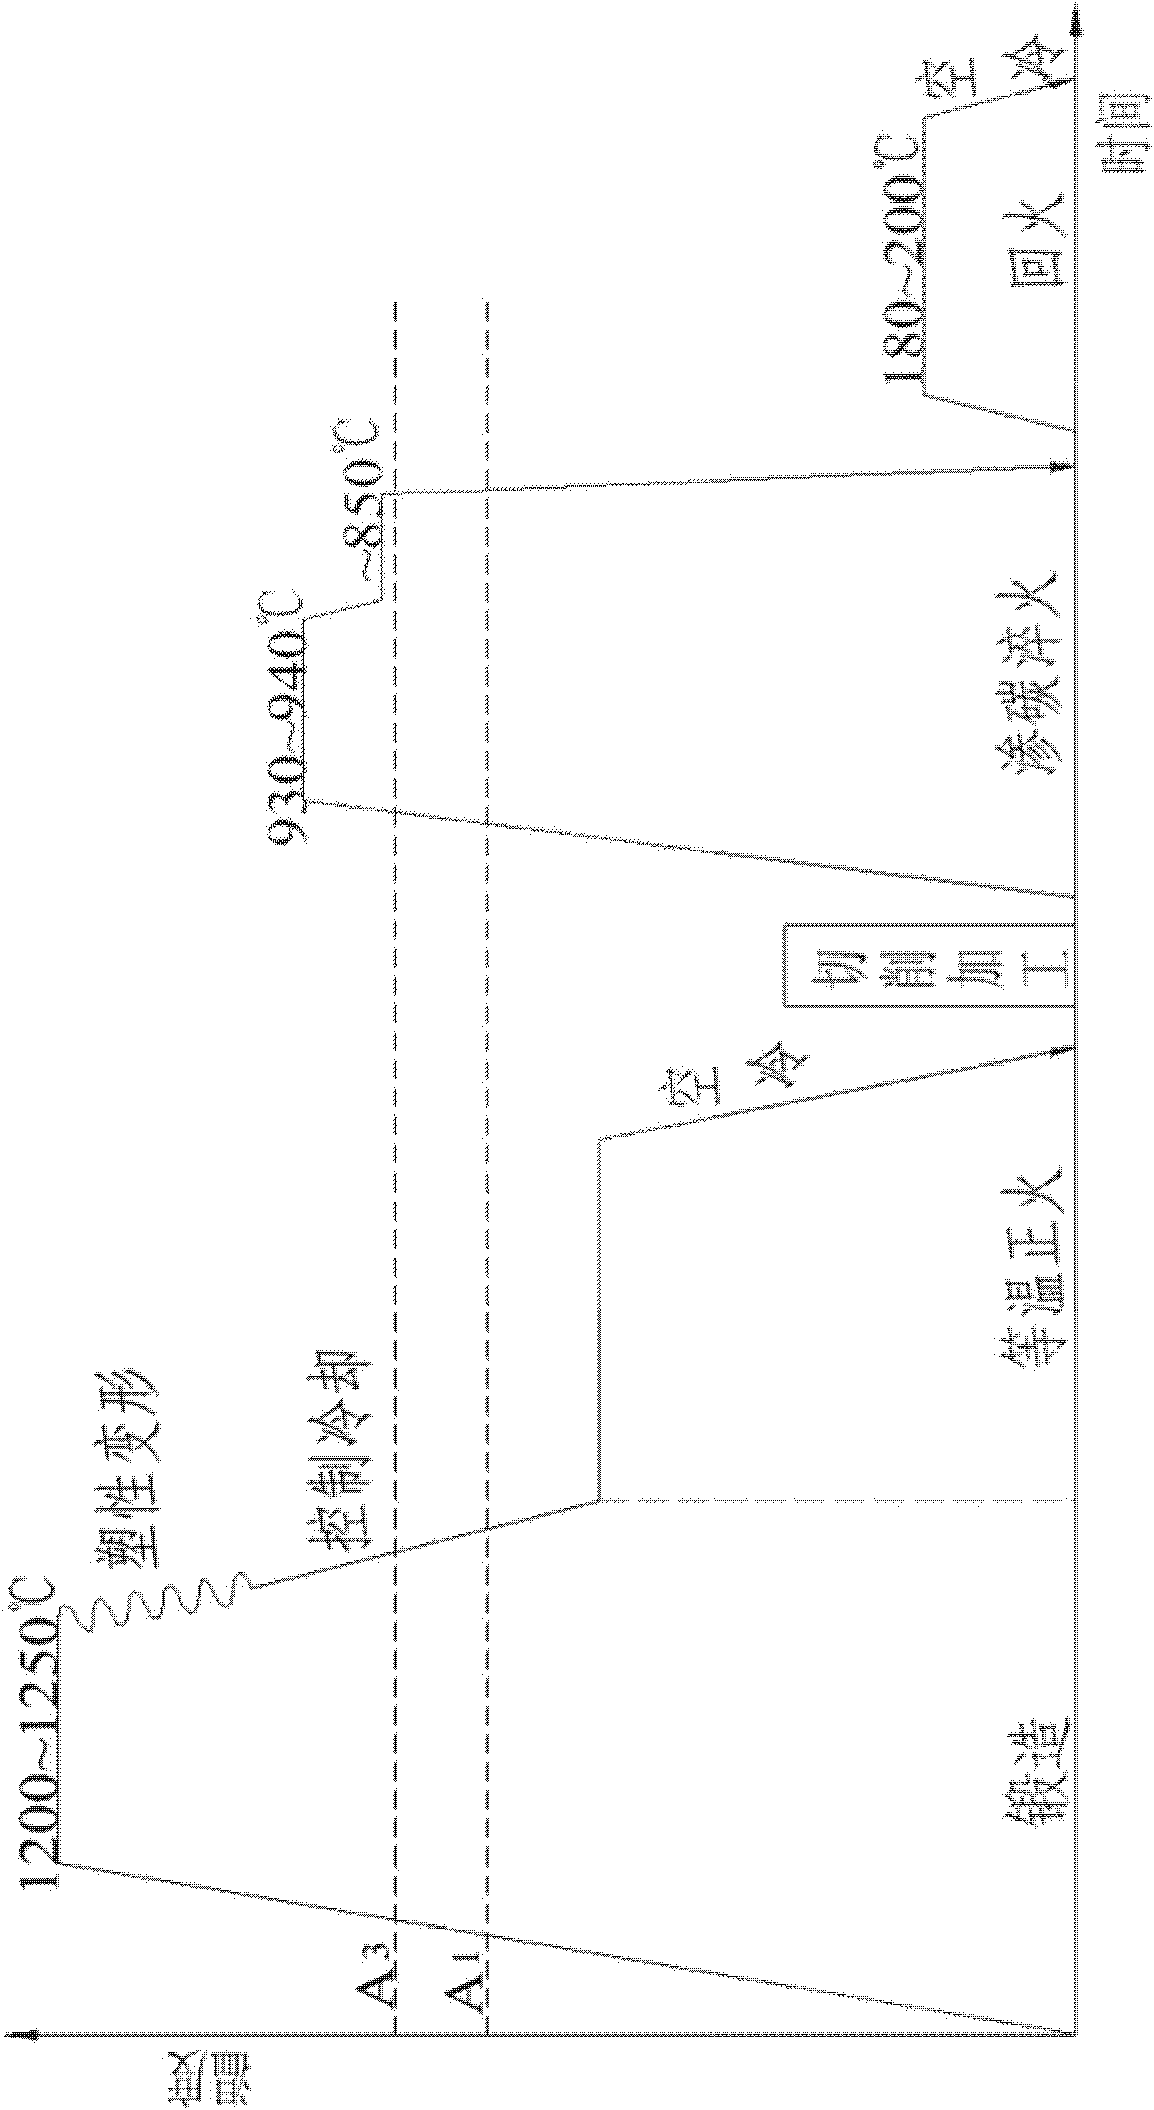 Forging waste heat isothermal normalizing device and method